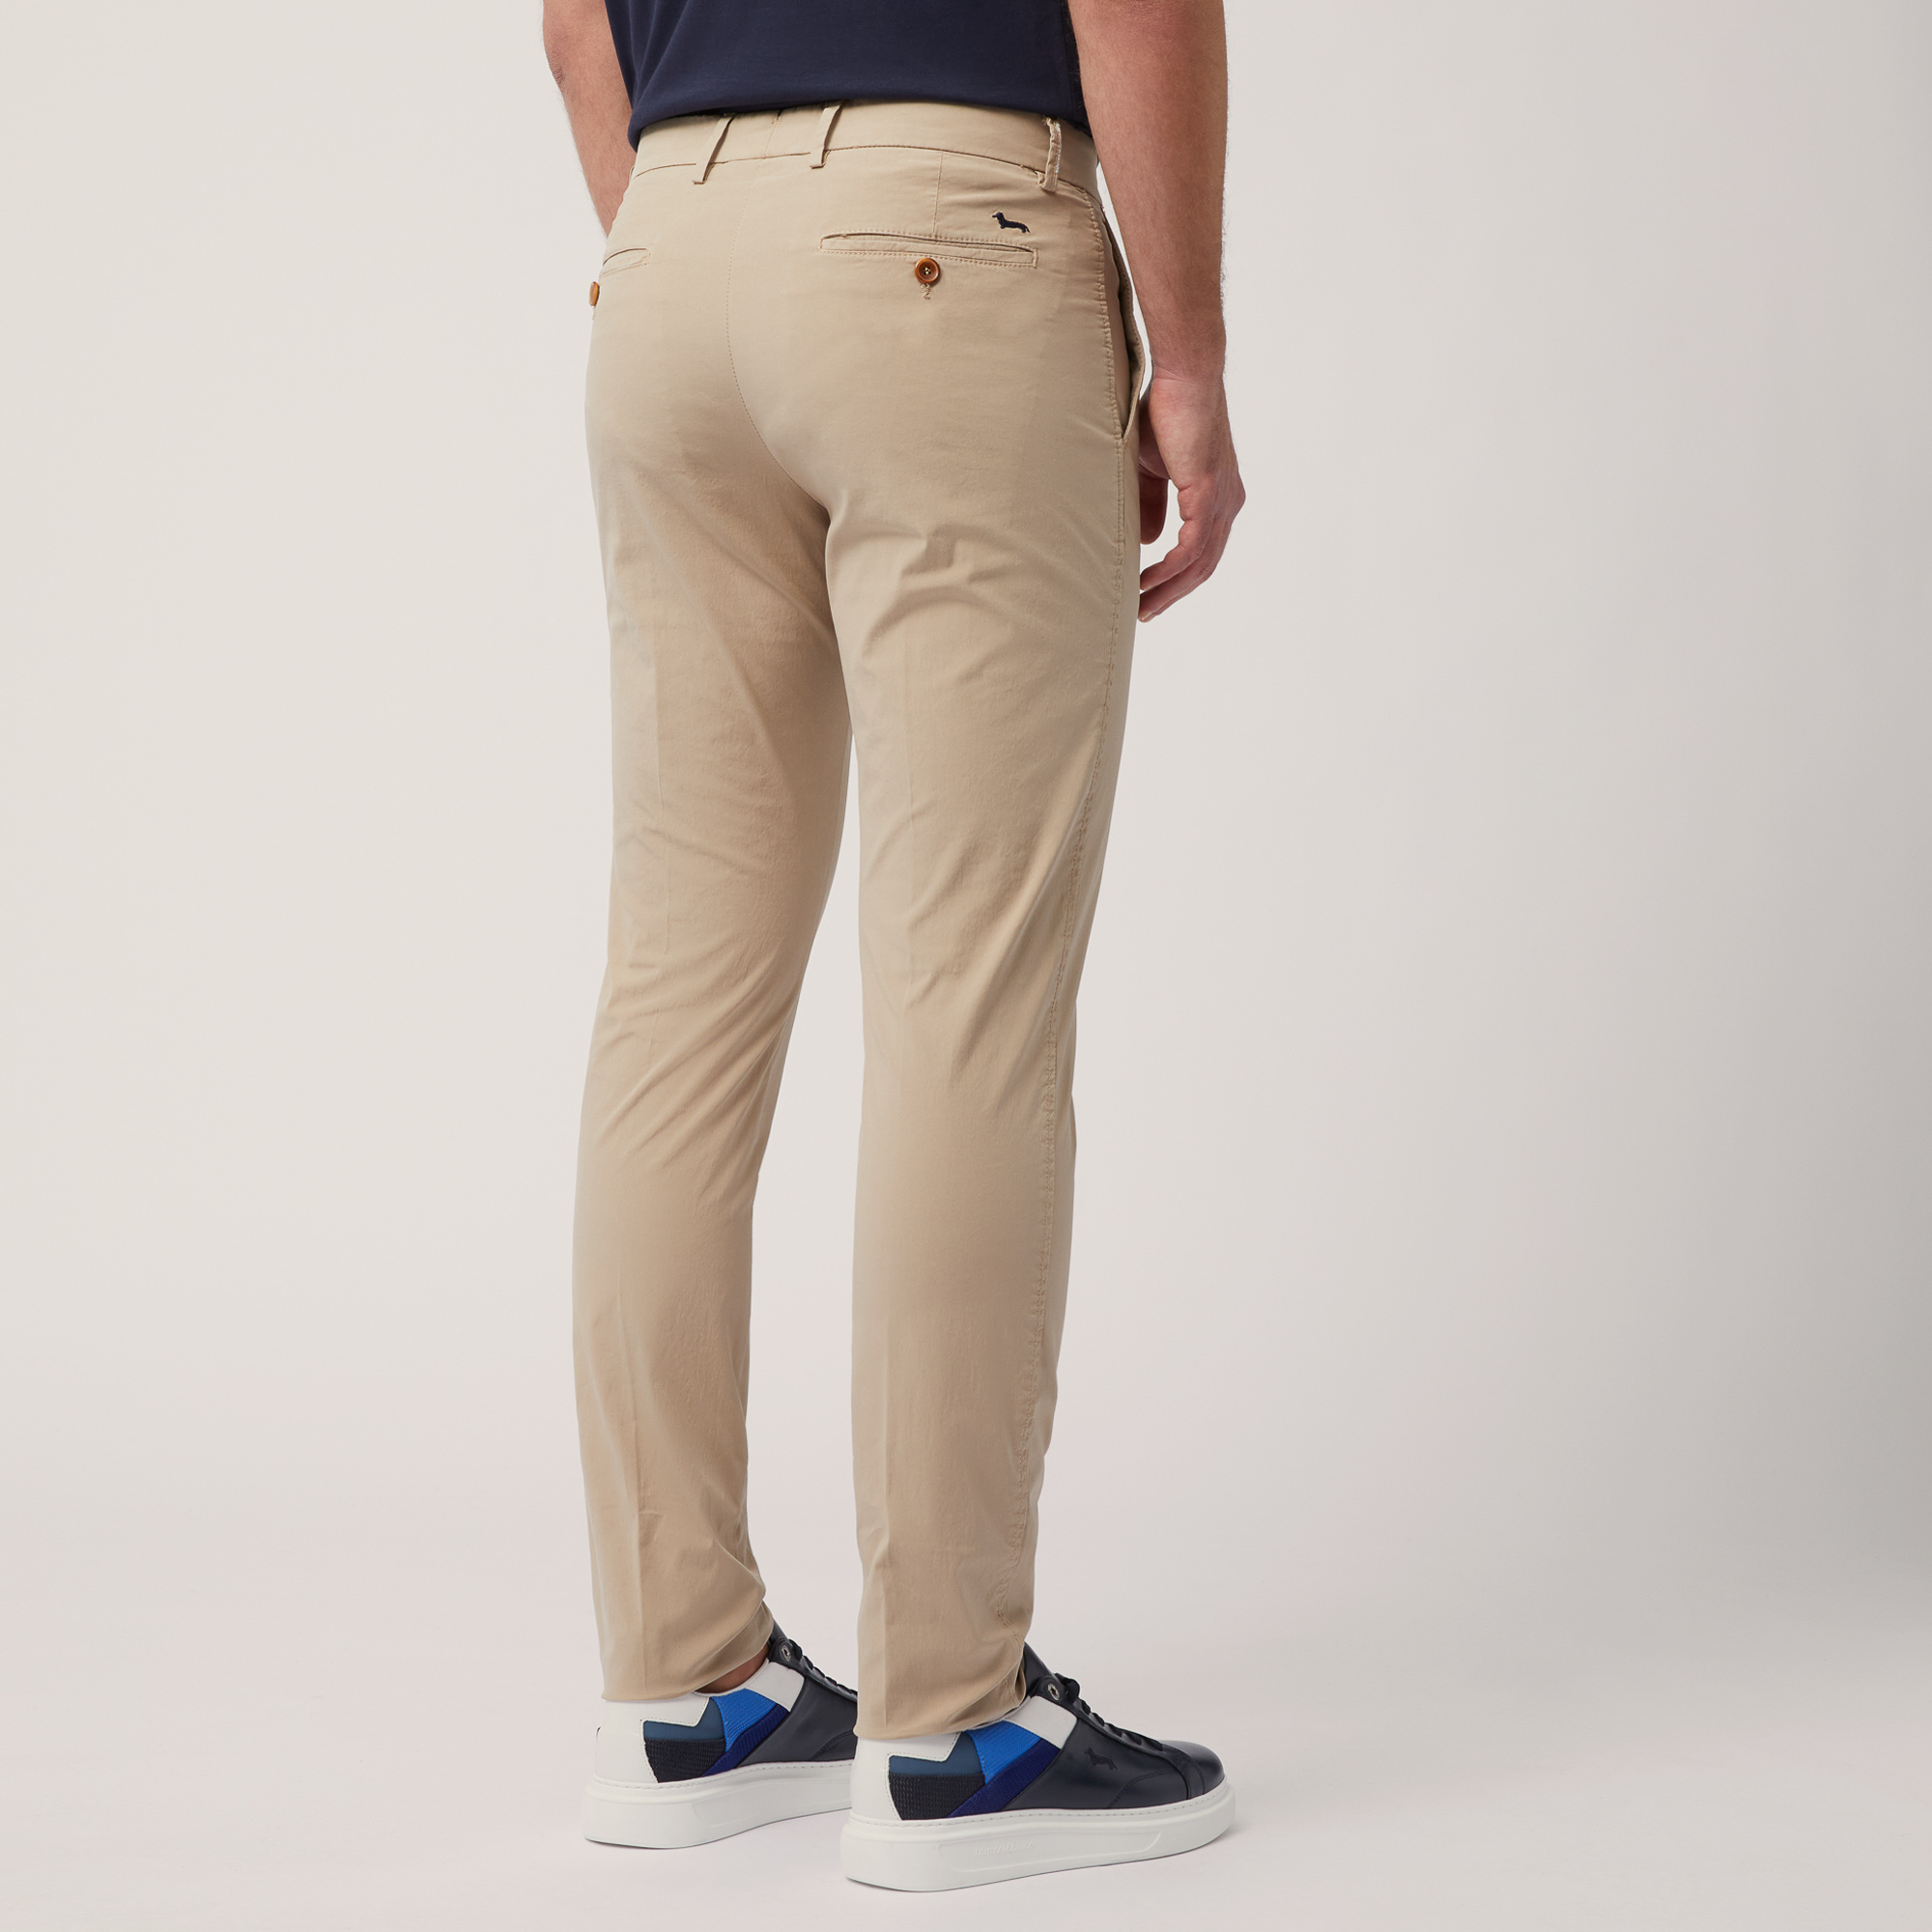 Narrow Fit Chino Pants, Beige, large image number 1